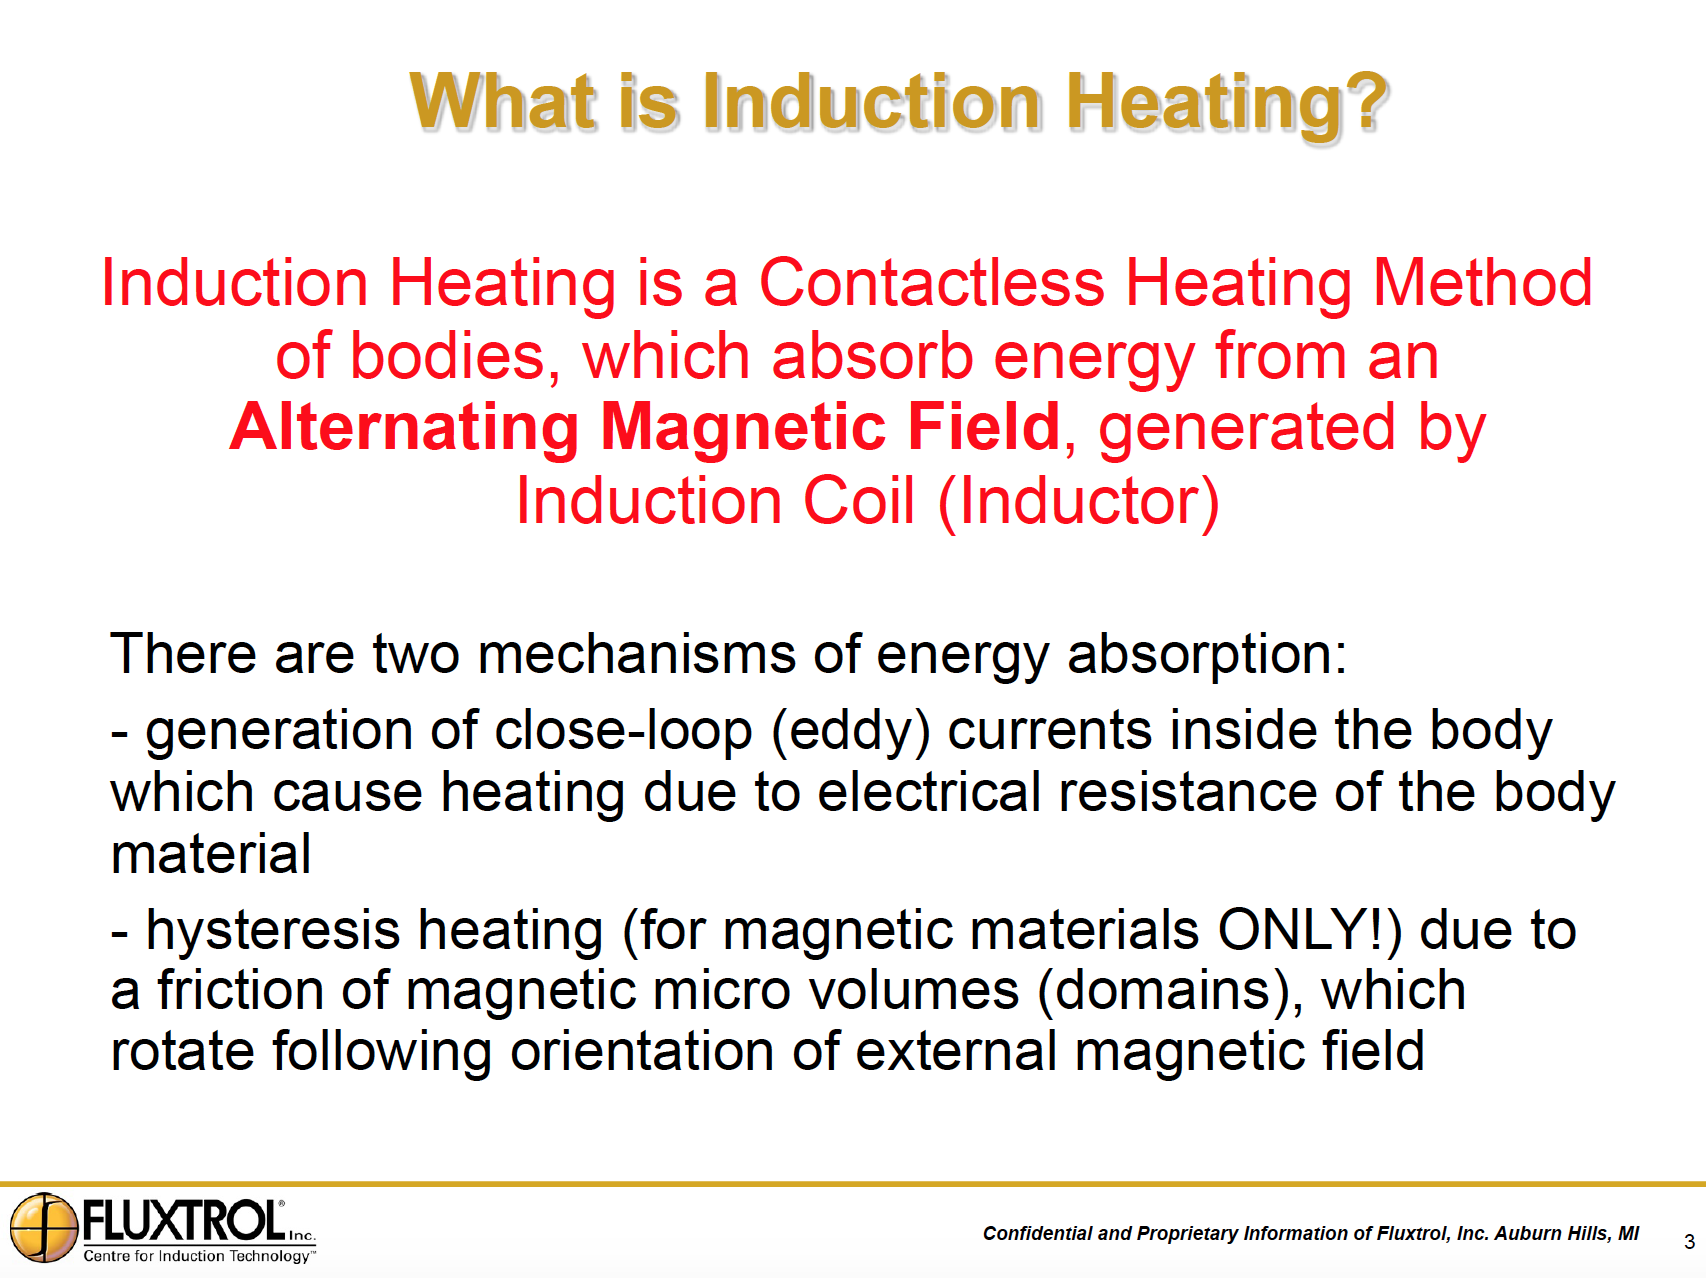 Fluxtrol | Applications of Induction Heating Enabling Advancement in Materials Science Figure 2 - What is Induction Heating?